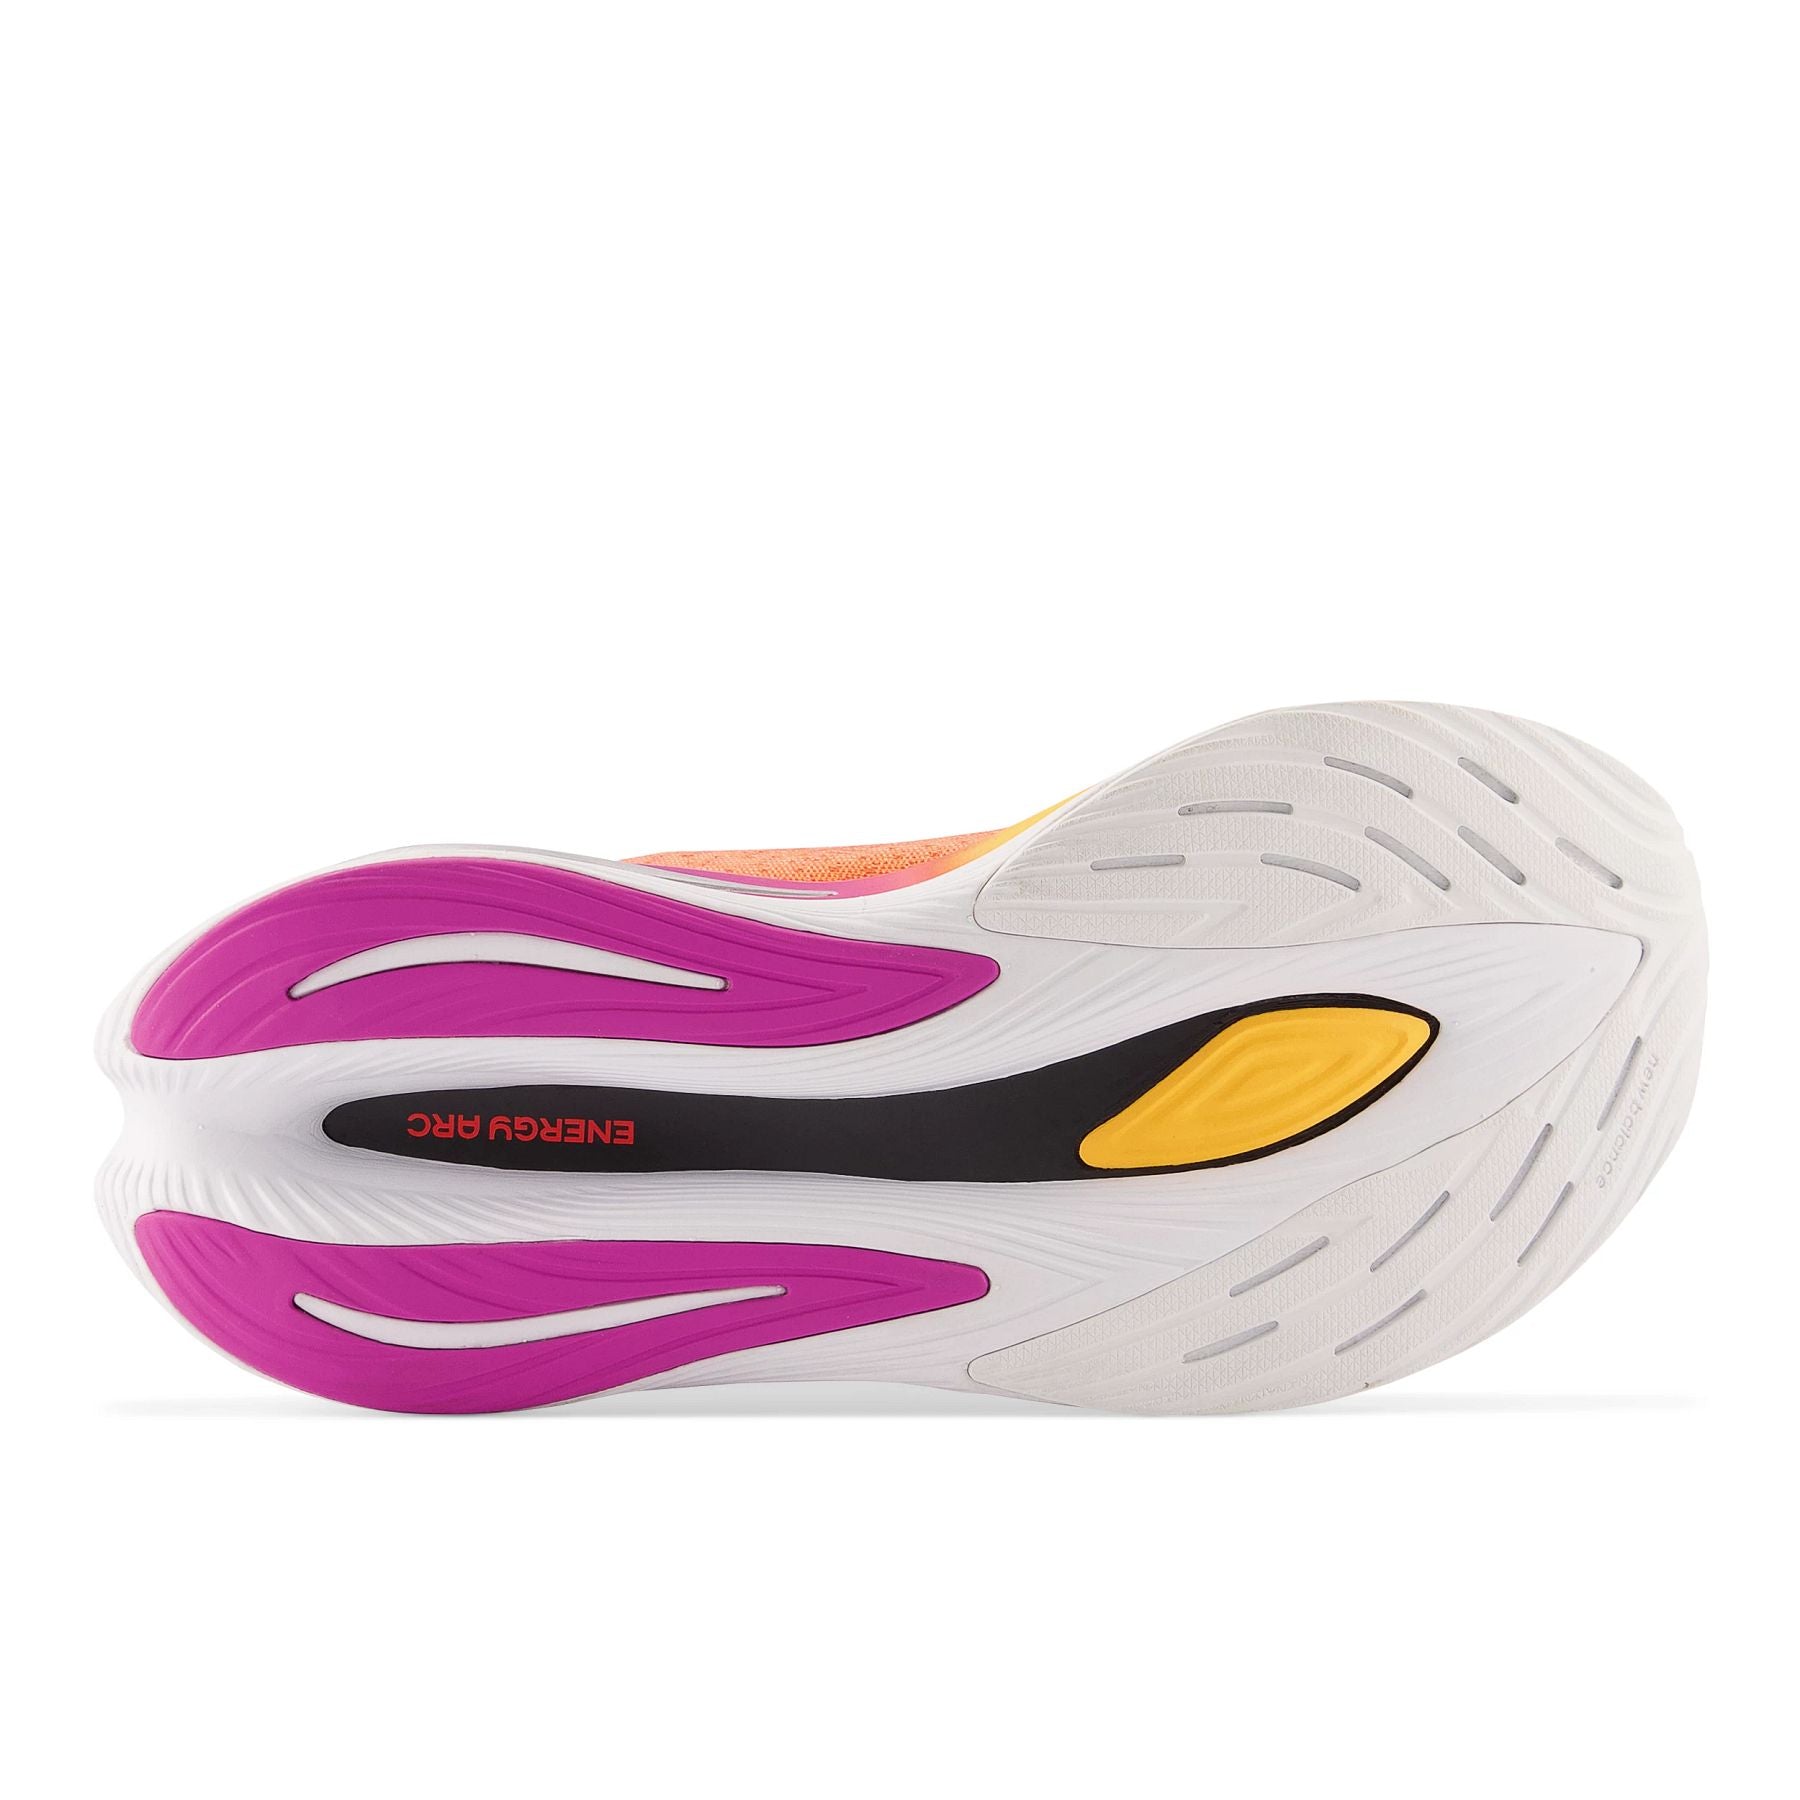 Bottom (outer sole) view of the Women's Fuel Cell Supercomp Trainer by New Balance in the color Electric Red/Silver Metallic